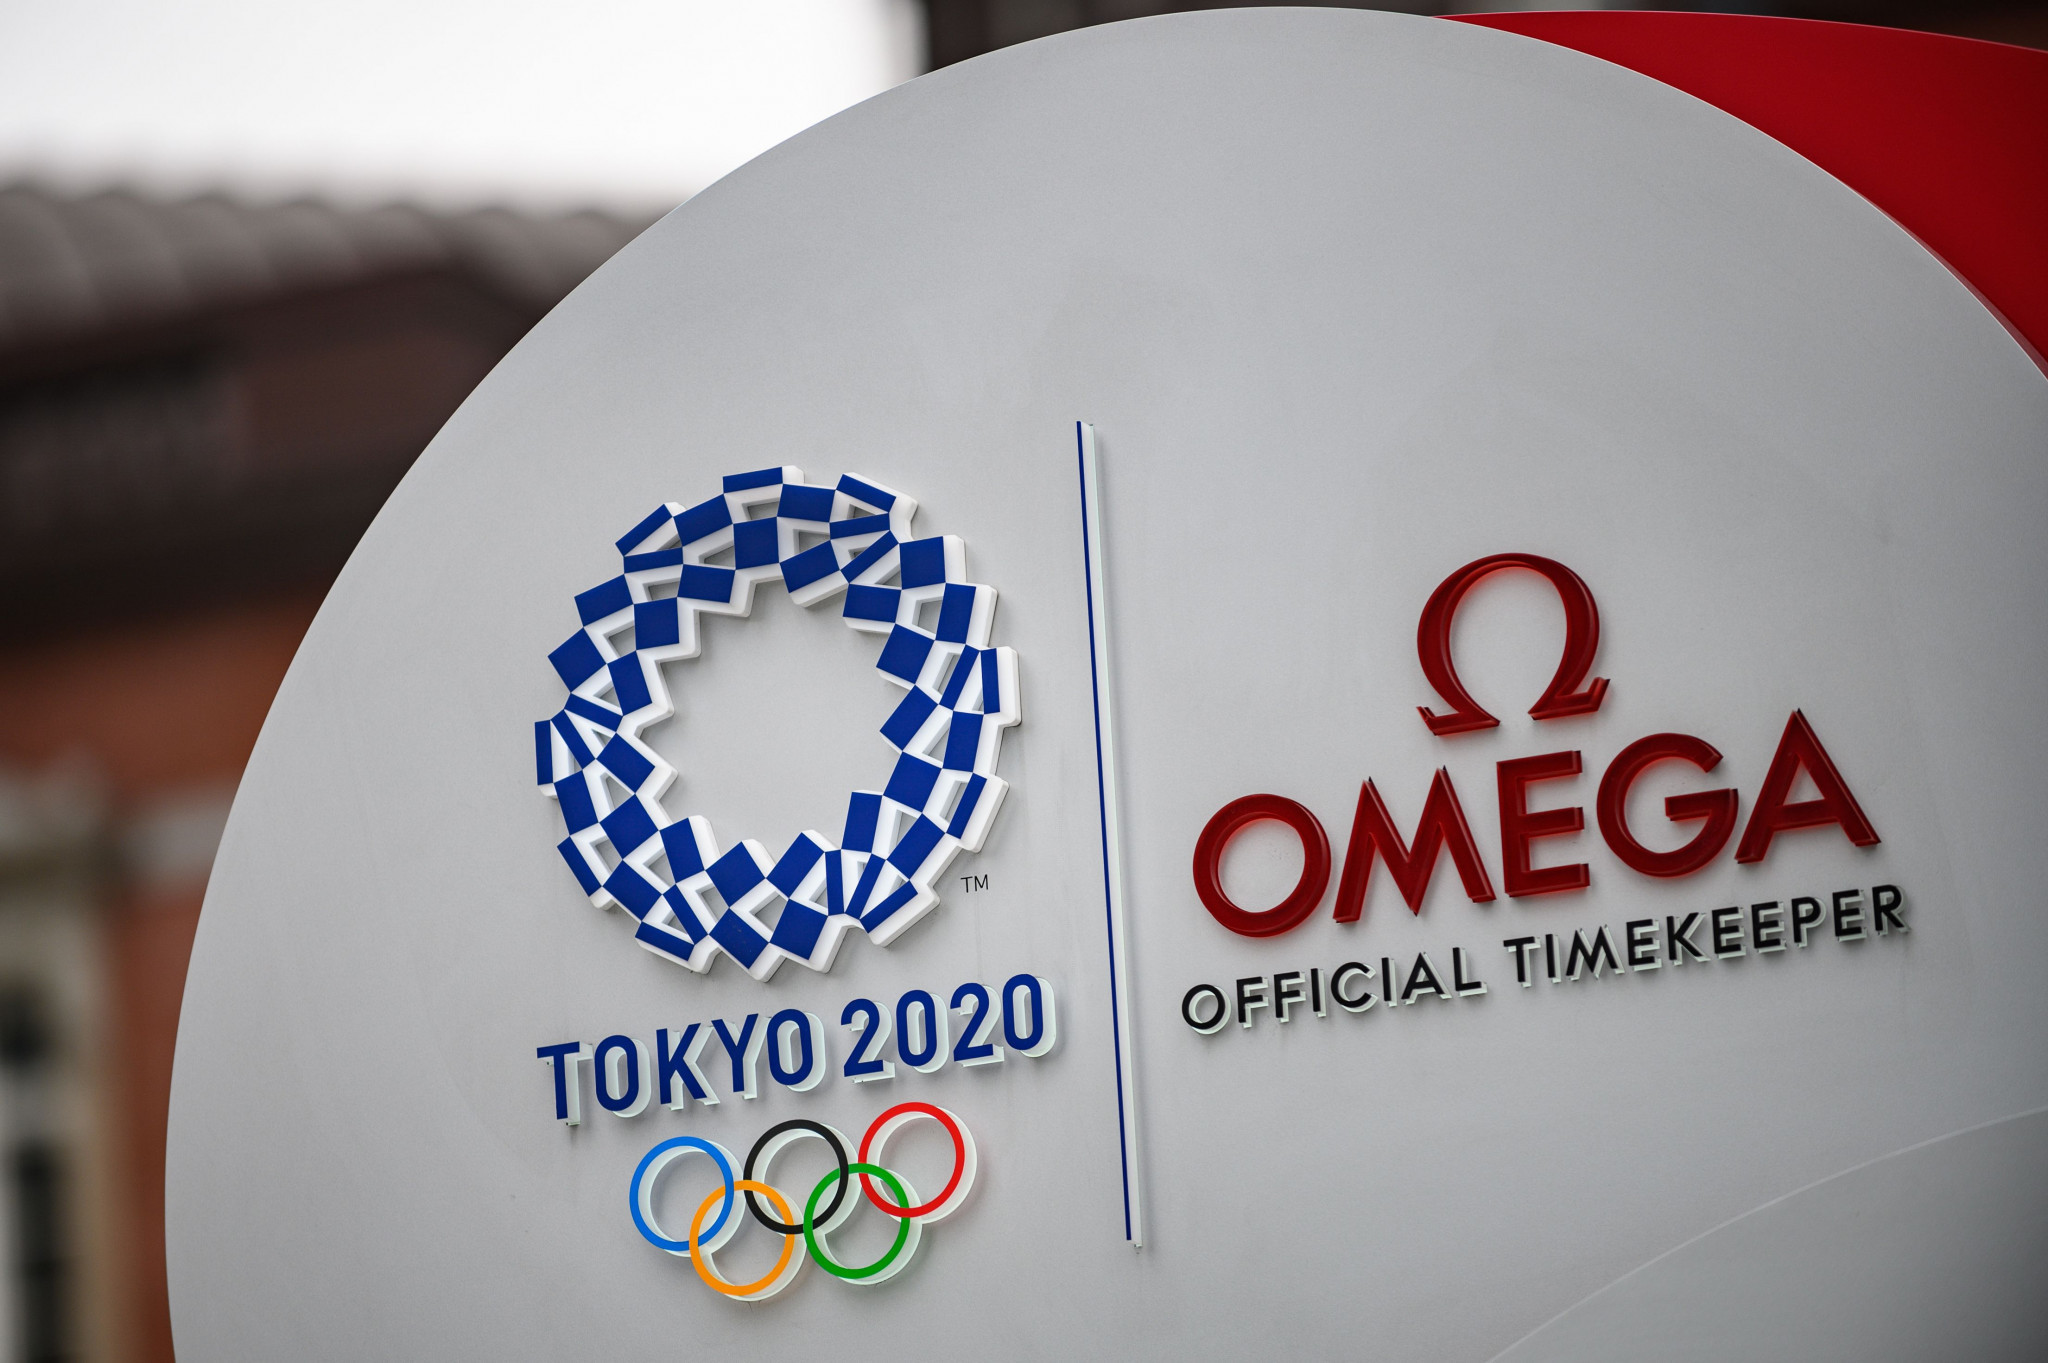 Olympic sponsors could ask for compensation if Tokyo 2020 do not go ahead in a normal fashion ©Getty Images